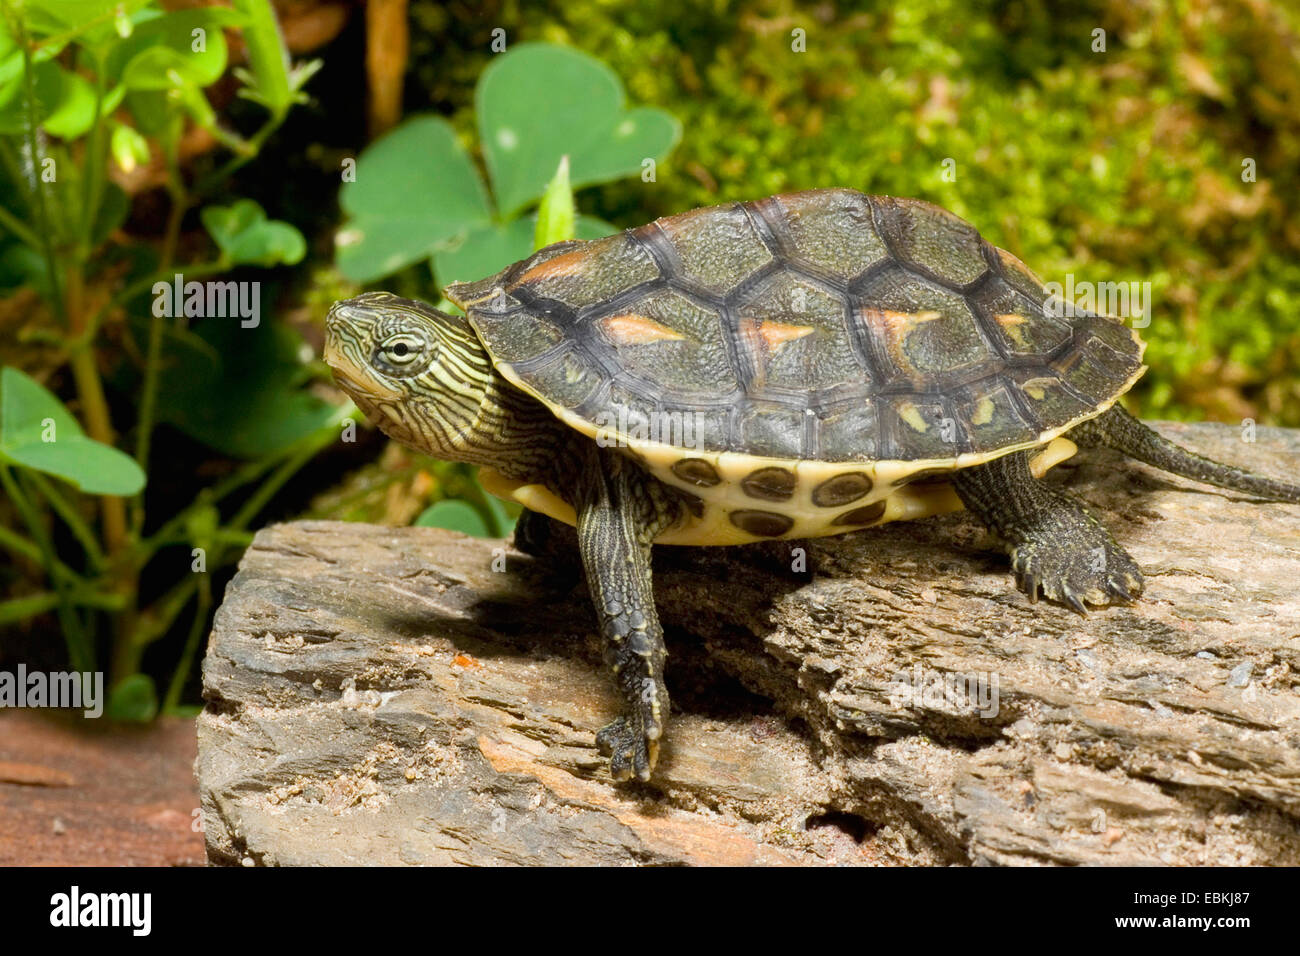 Chinese stripe-necked turtle, Chinese striped-neck turtle (Ocadia sinensis), lying on a tree trunk Stock Photo